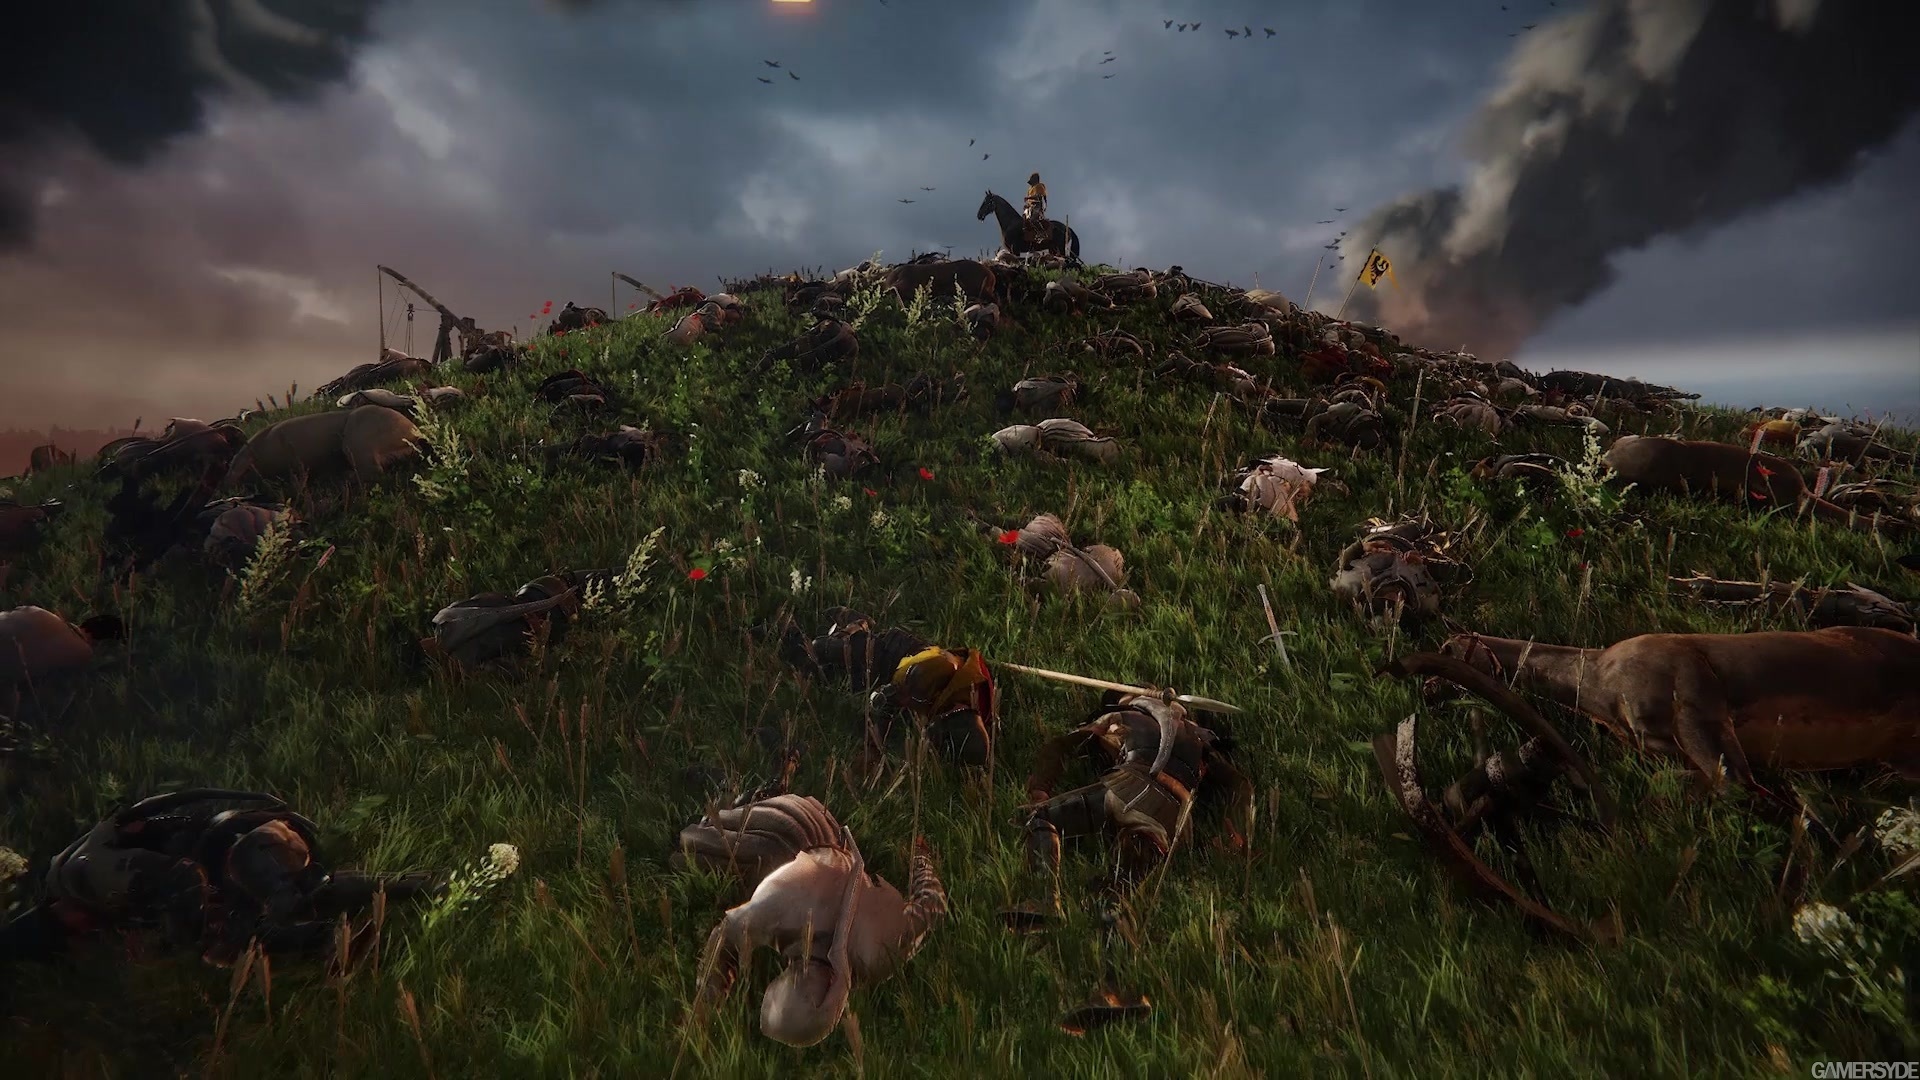 Kingdom Come: Deliverance Wallpapers Images Photos Pictures Backgrounds